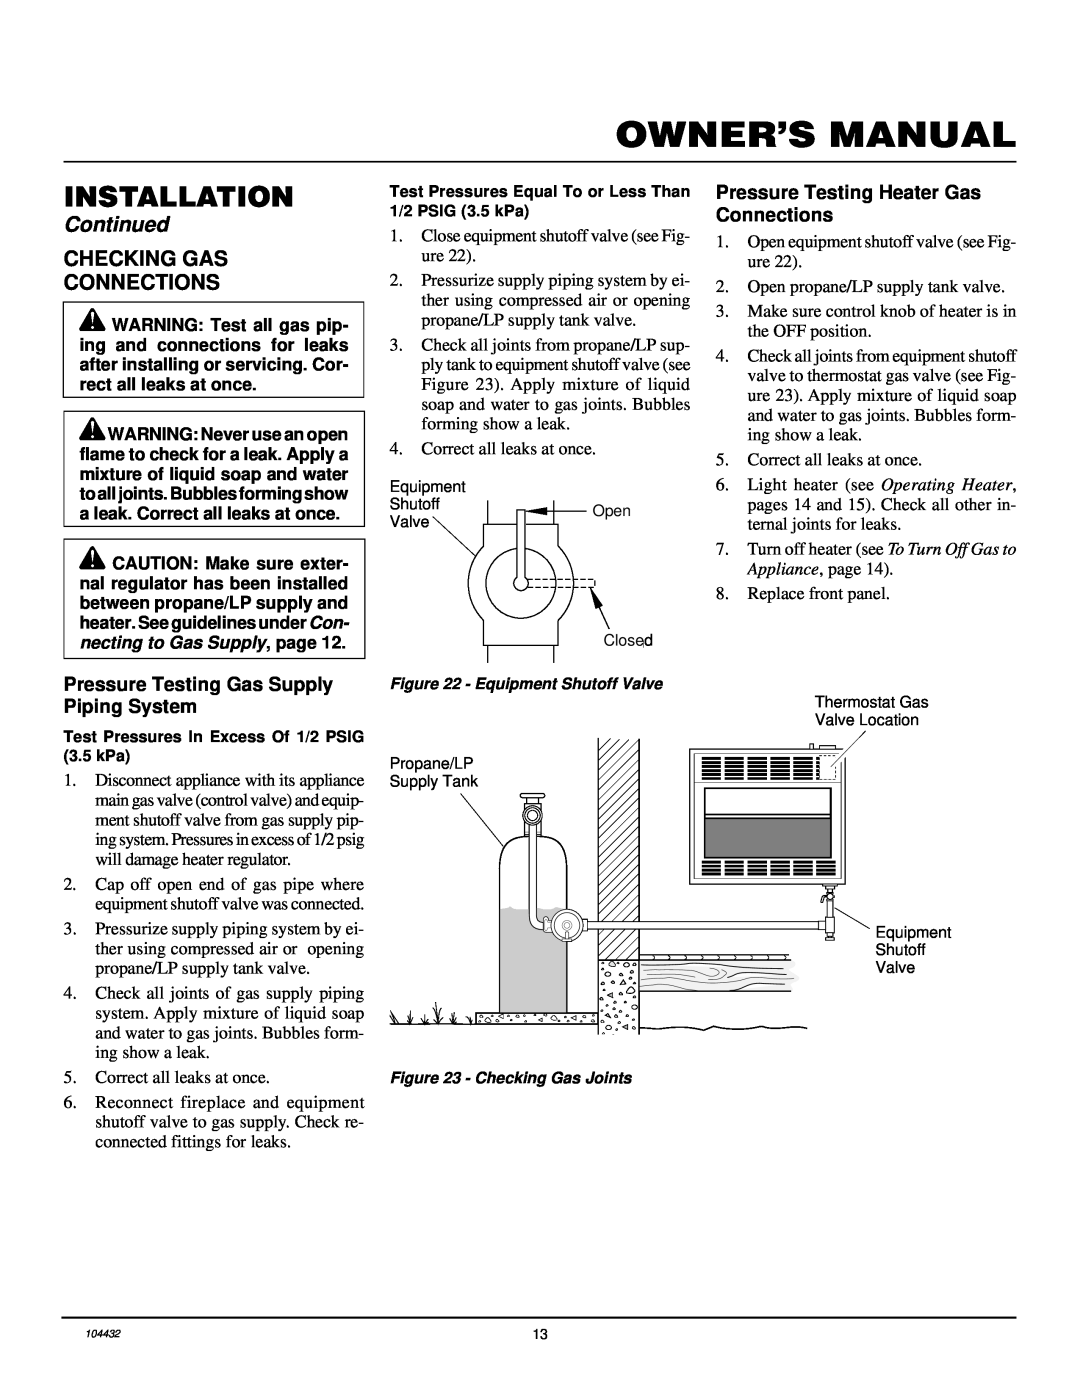 Vanguard Heating VMH3000TP installation manual Installation, Continued, Pressure Testing Gas Supply Piping System 